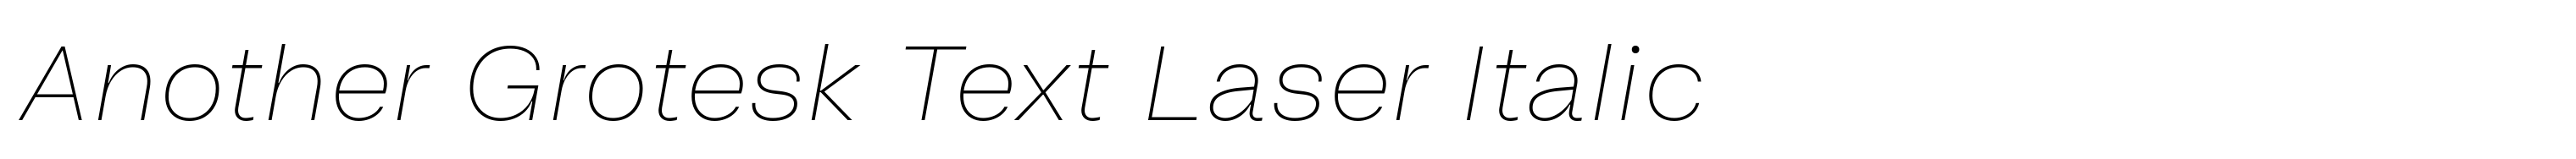 Another Grotesk Text Laser Italic